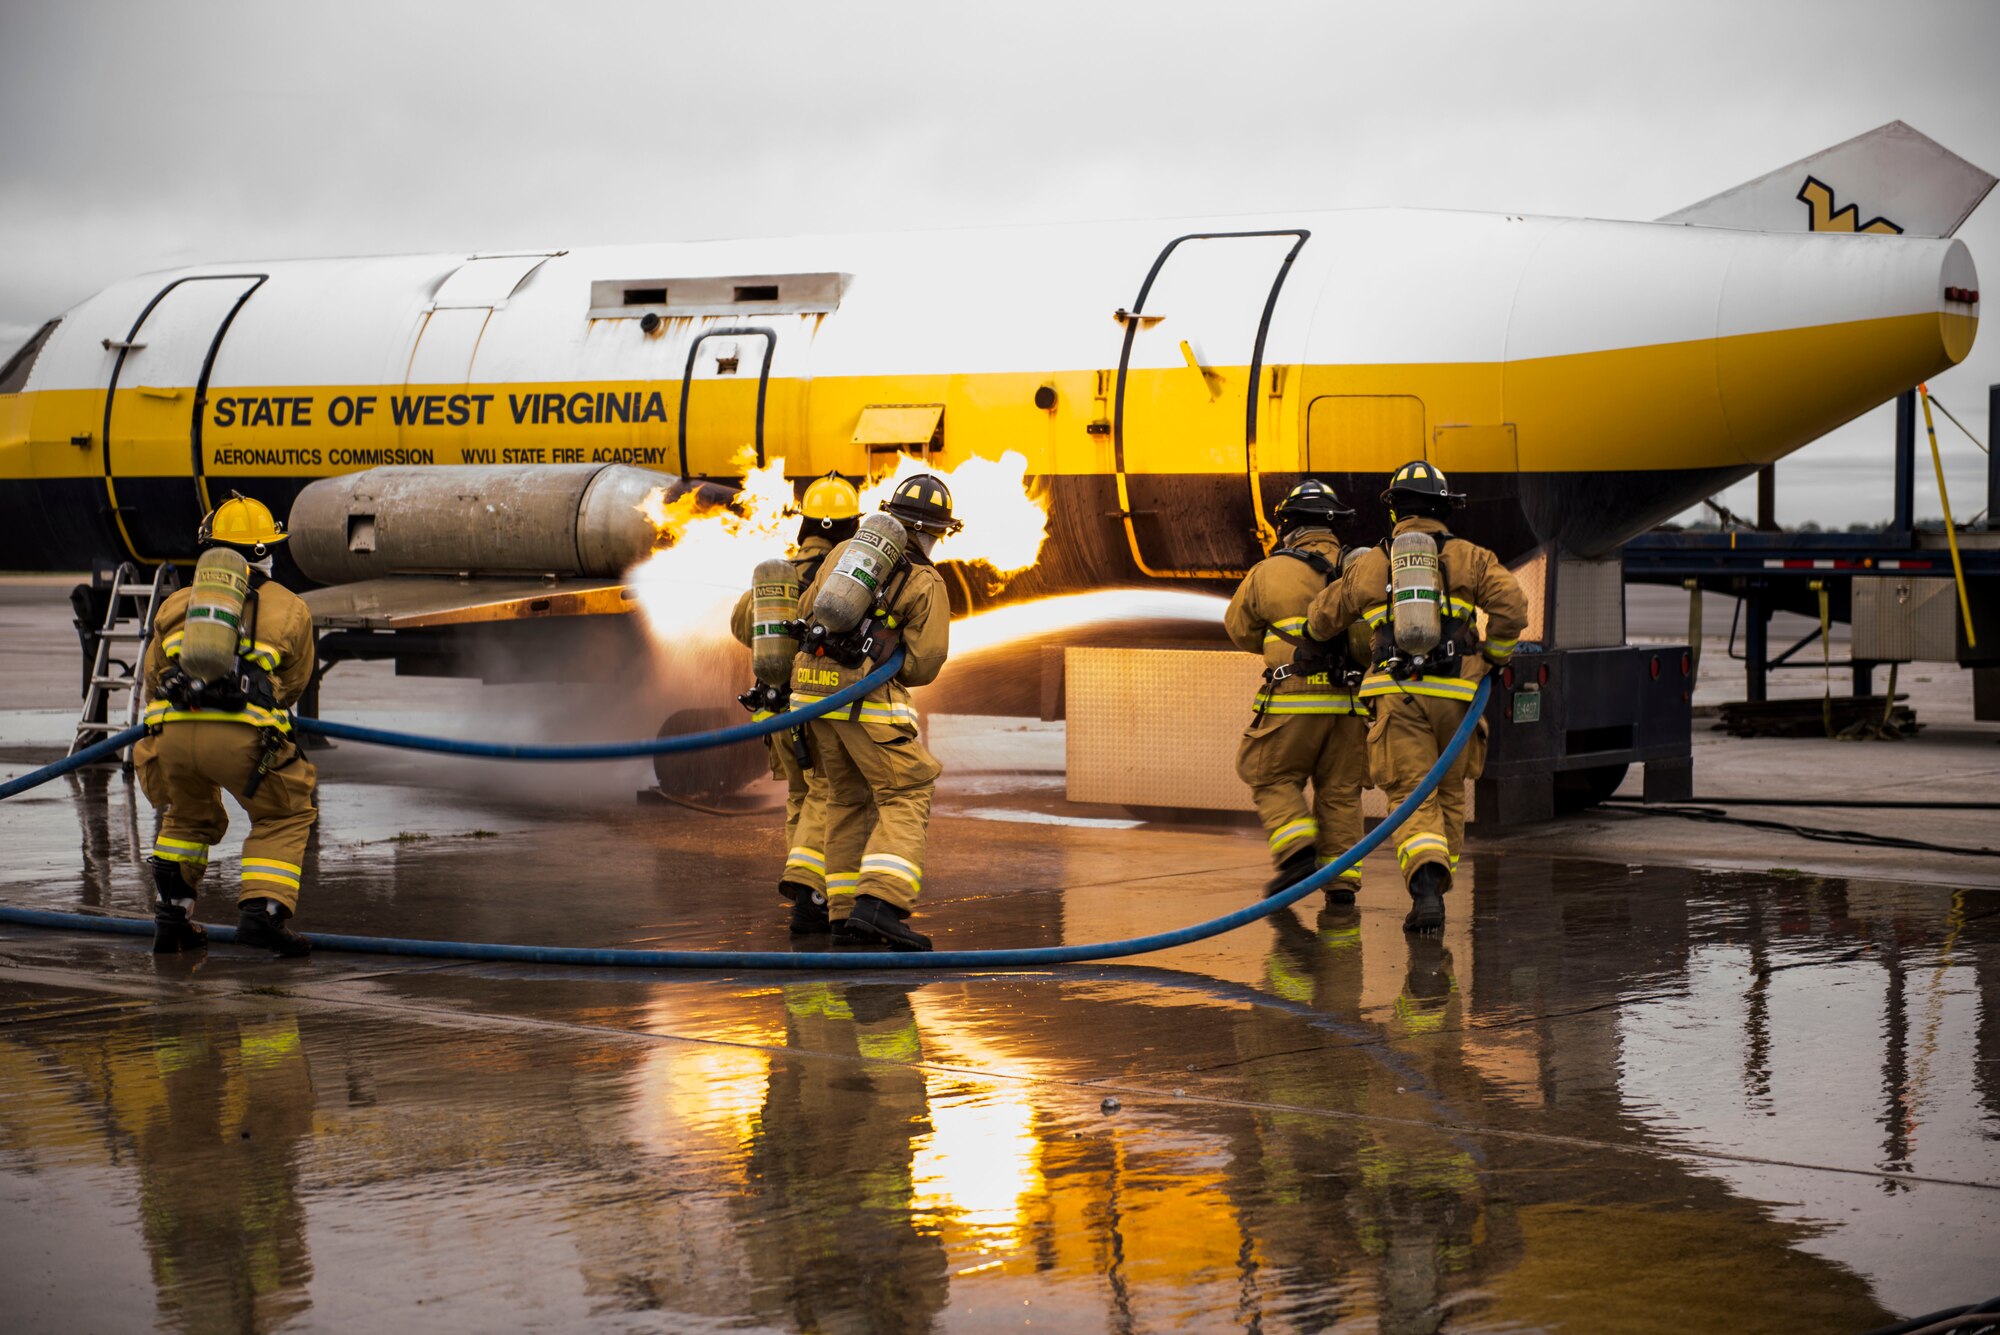 Firefighters from the 167th Airlift Wing extinguish an engine fire on the mobile aircraft fire simulator provided by West Virginia University State Fire Academy during annual Federal Aviation Administration Part 139 Live Fire Training at Martinsburg, W.Va., Oct. 13-14, 2018. (U.S. Air National Guard photo by Staff Sgt. Timothy Sencindiver)